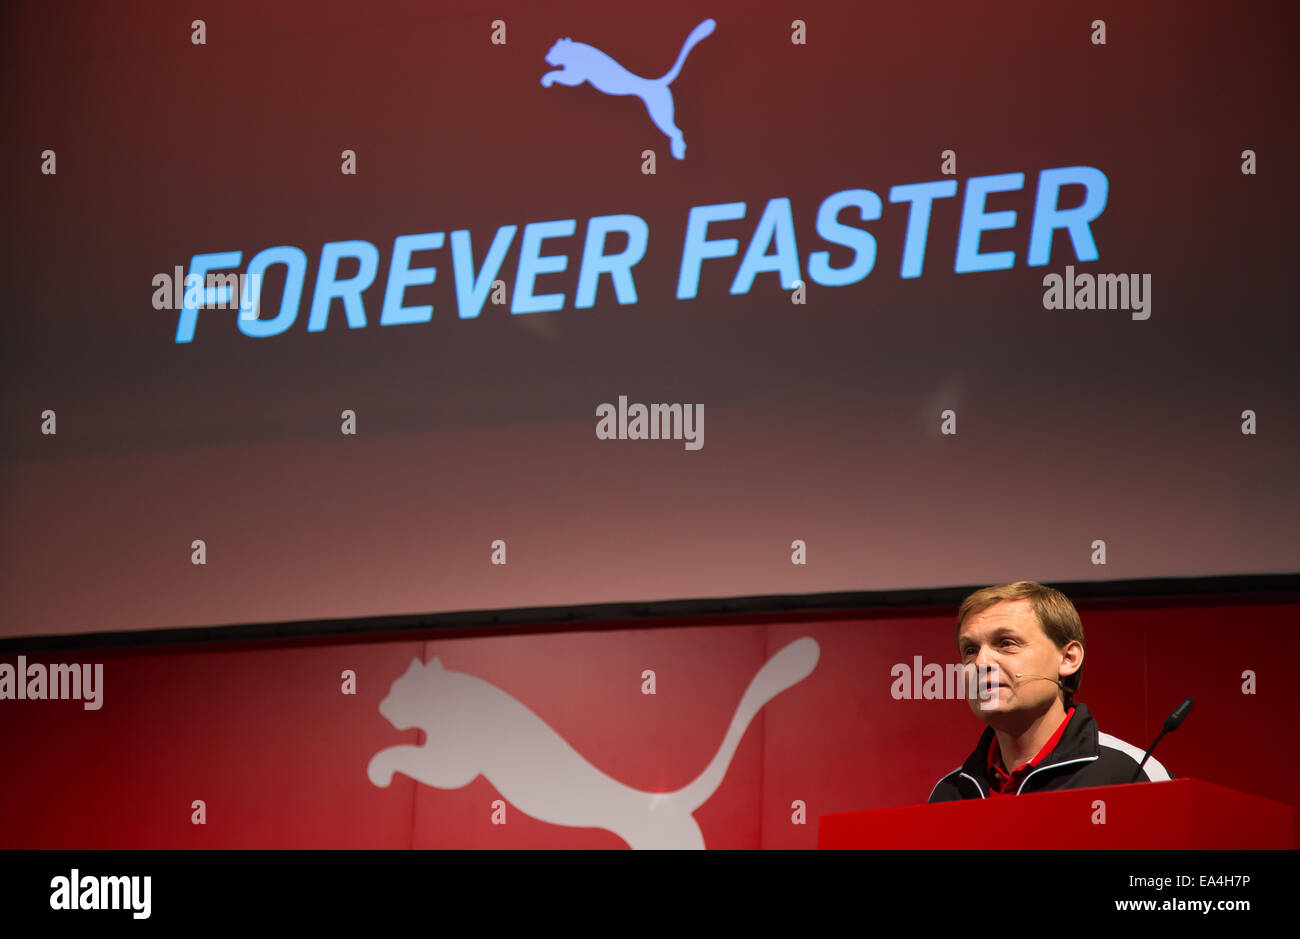 PUMA CEO Bjoern Gulden speaks during press conference in Herzogenaurach, German with Forever Faster slogan in the COMMERCIAL HANDOUT/EDITORIAL USE SALES. Please quote the source "photo: PUMA/Ralf Roedel Stock